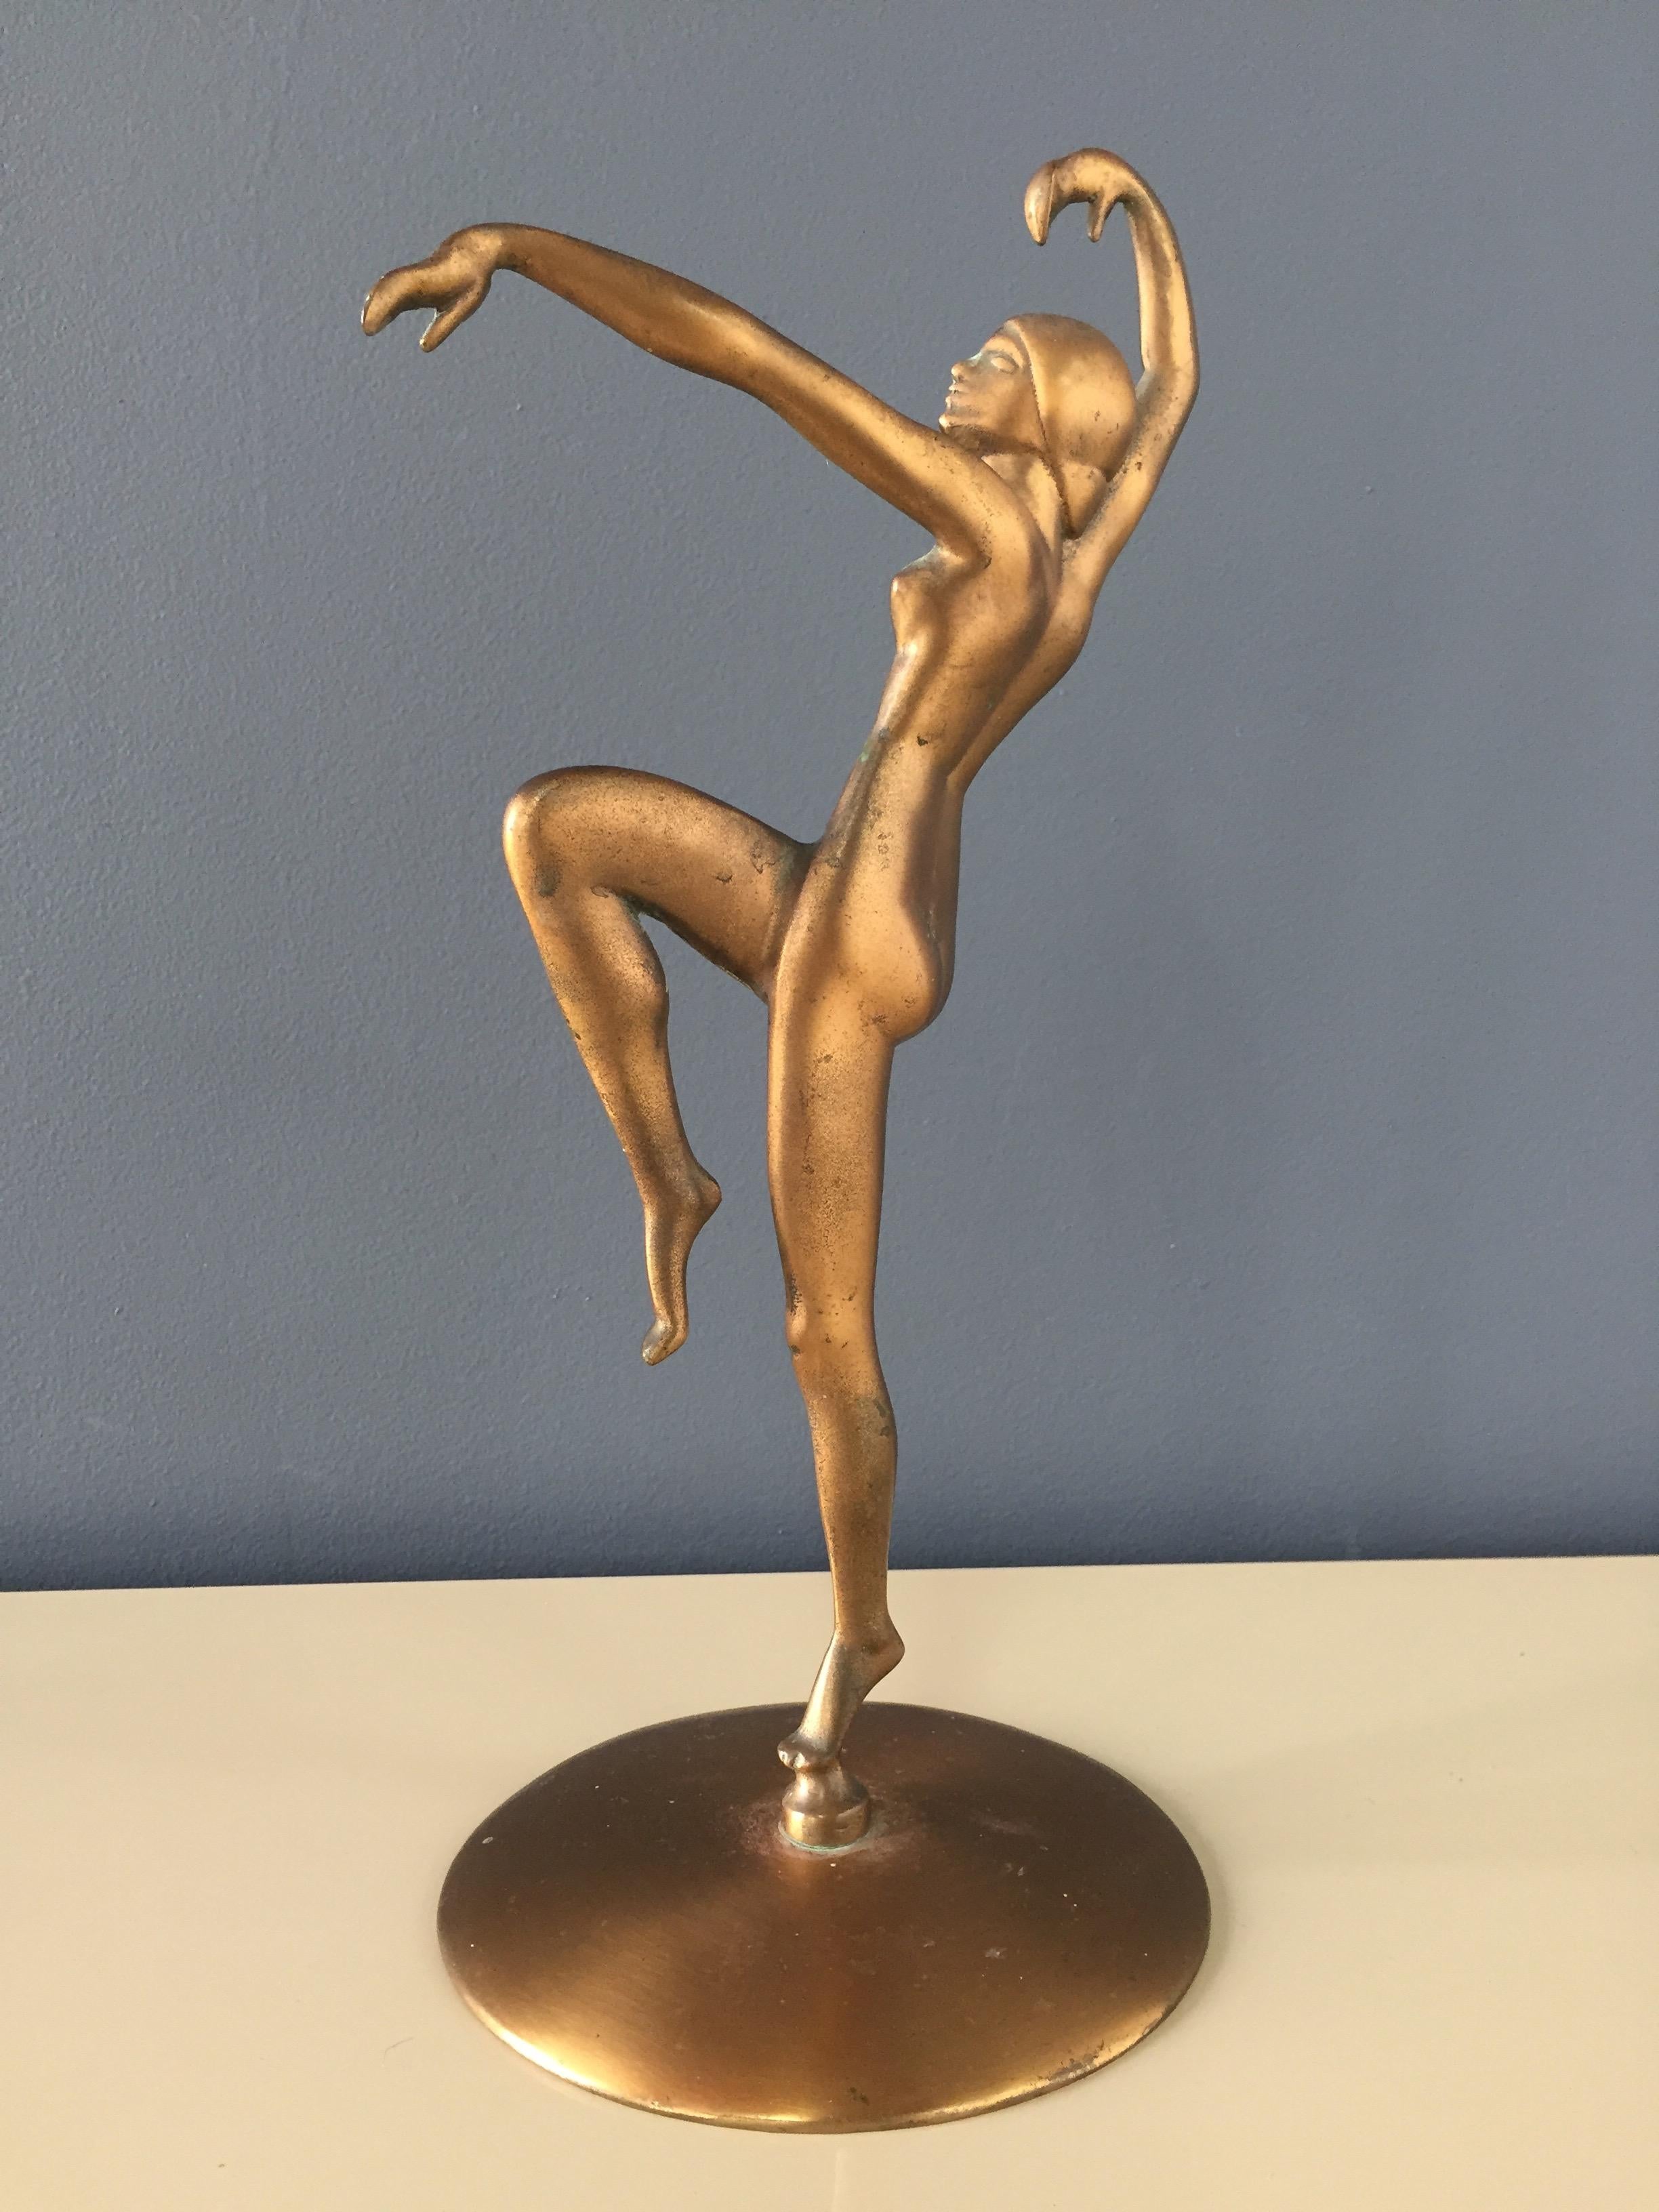 Art Deco Dancer Sculpture in Copper by Henri Lautier Cast by Robert Thew In Good Condition For Sale In Philadelphia, PA